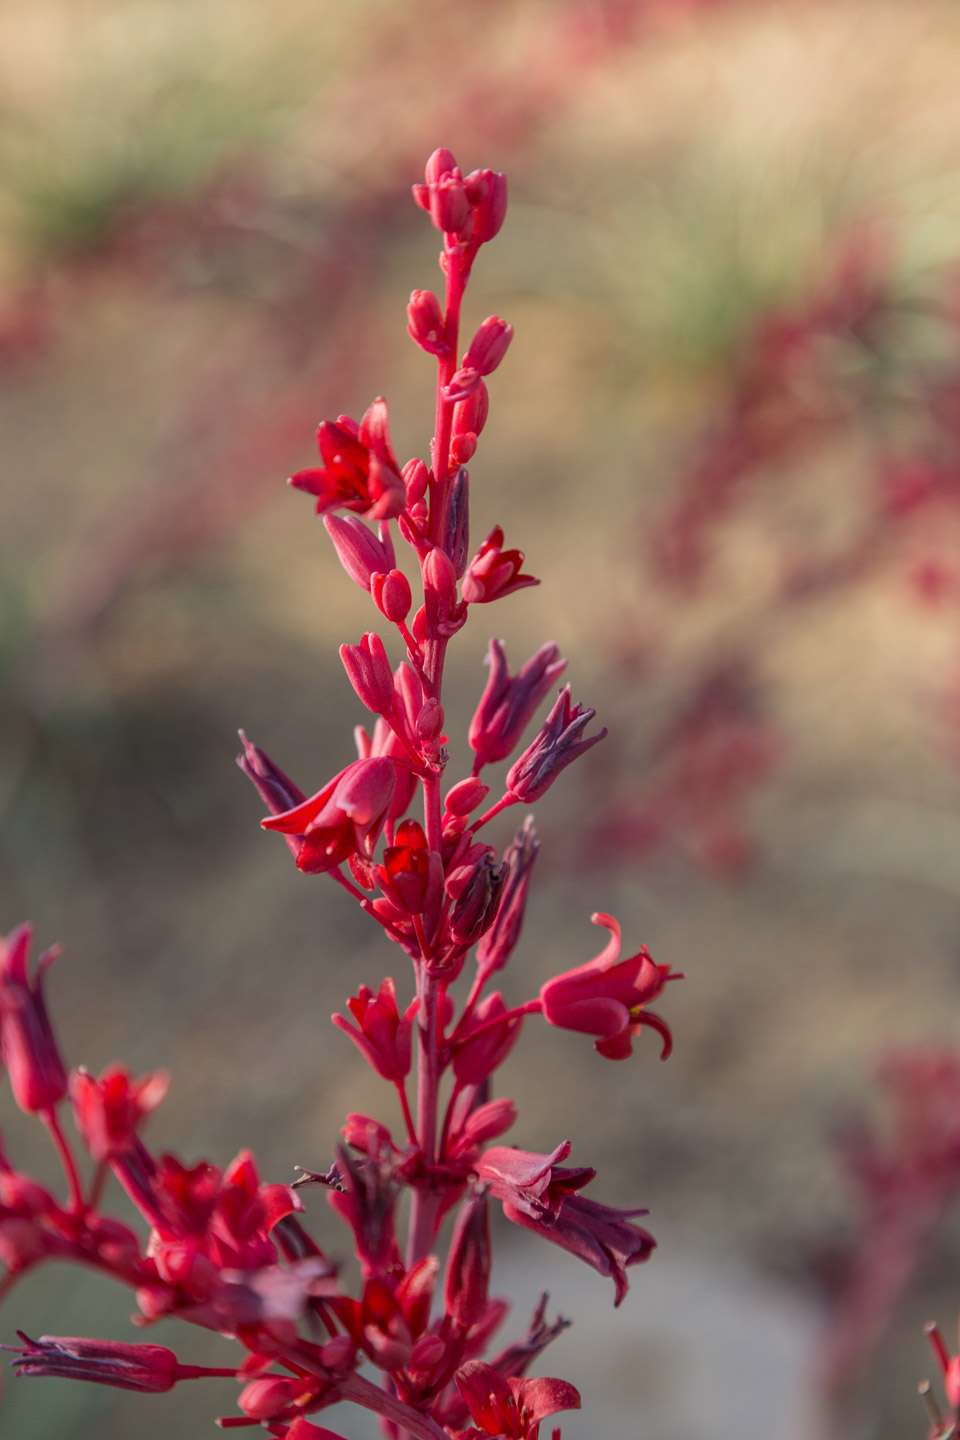 A close-up of the deep red flowers of the Brakelights Hesperaloe.